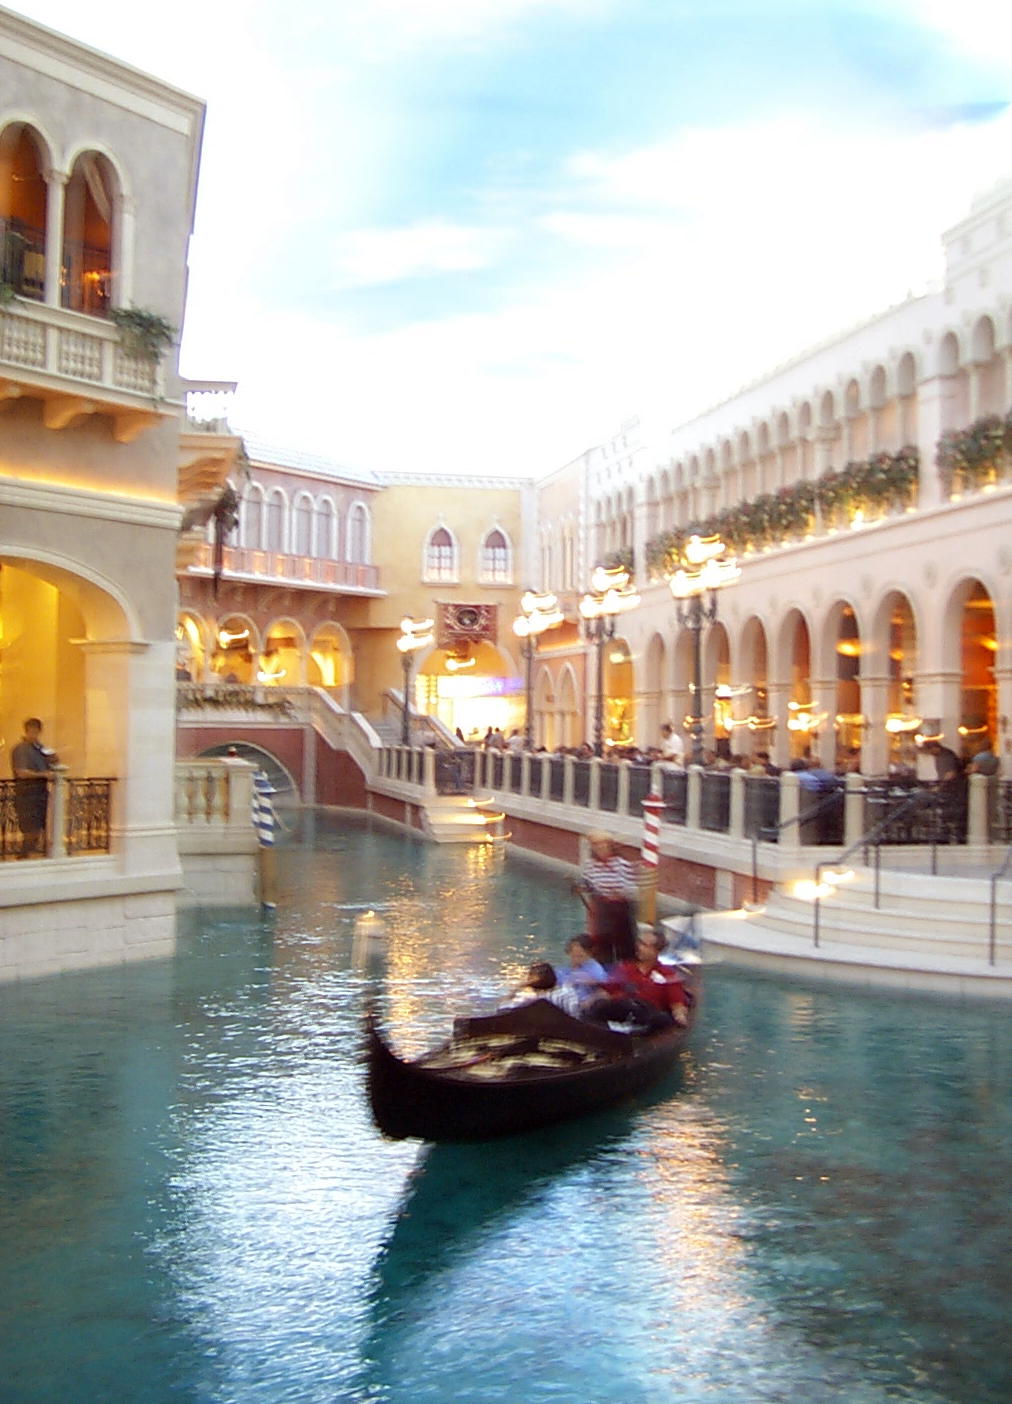 We can't stay away from the canal at the Venetian. Anyone for a boat ride?